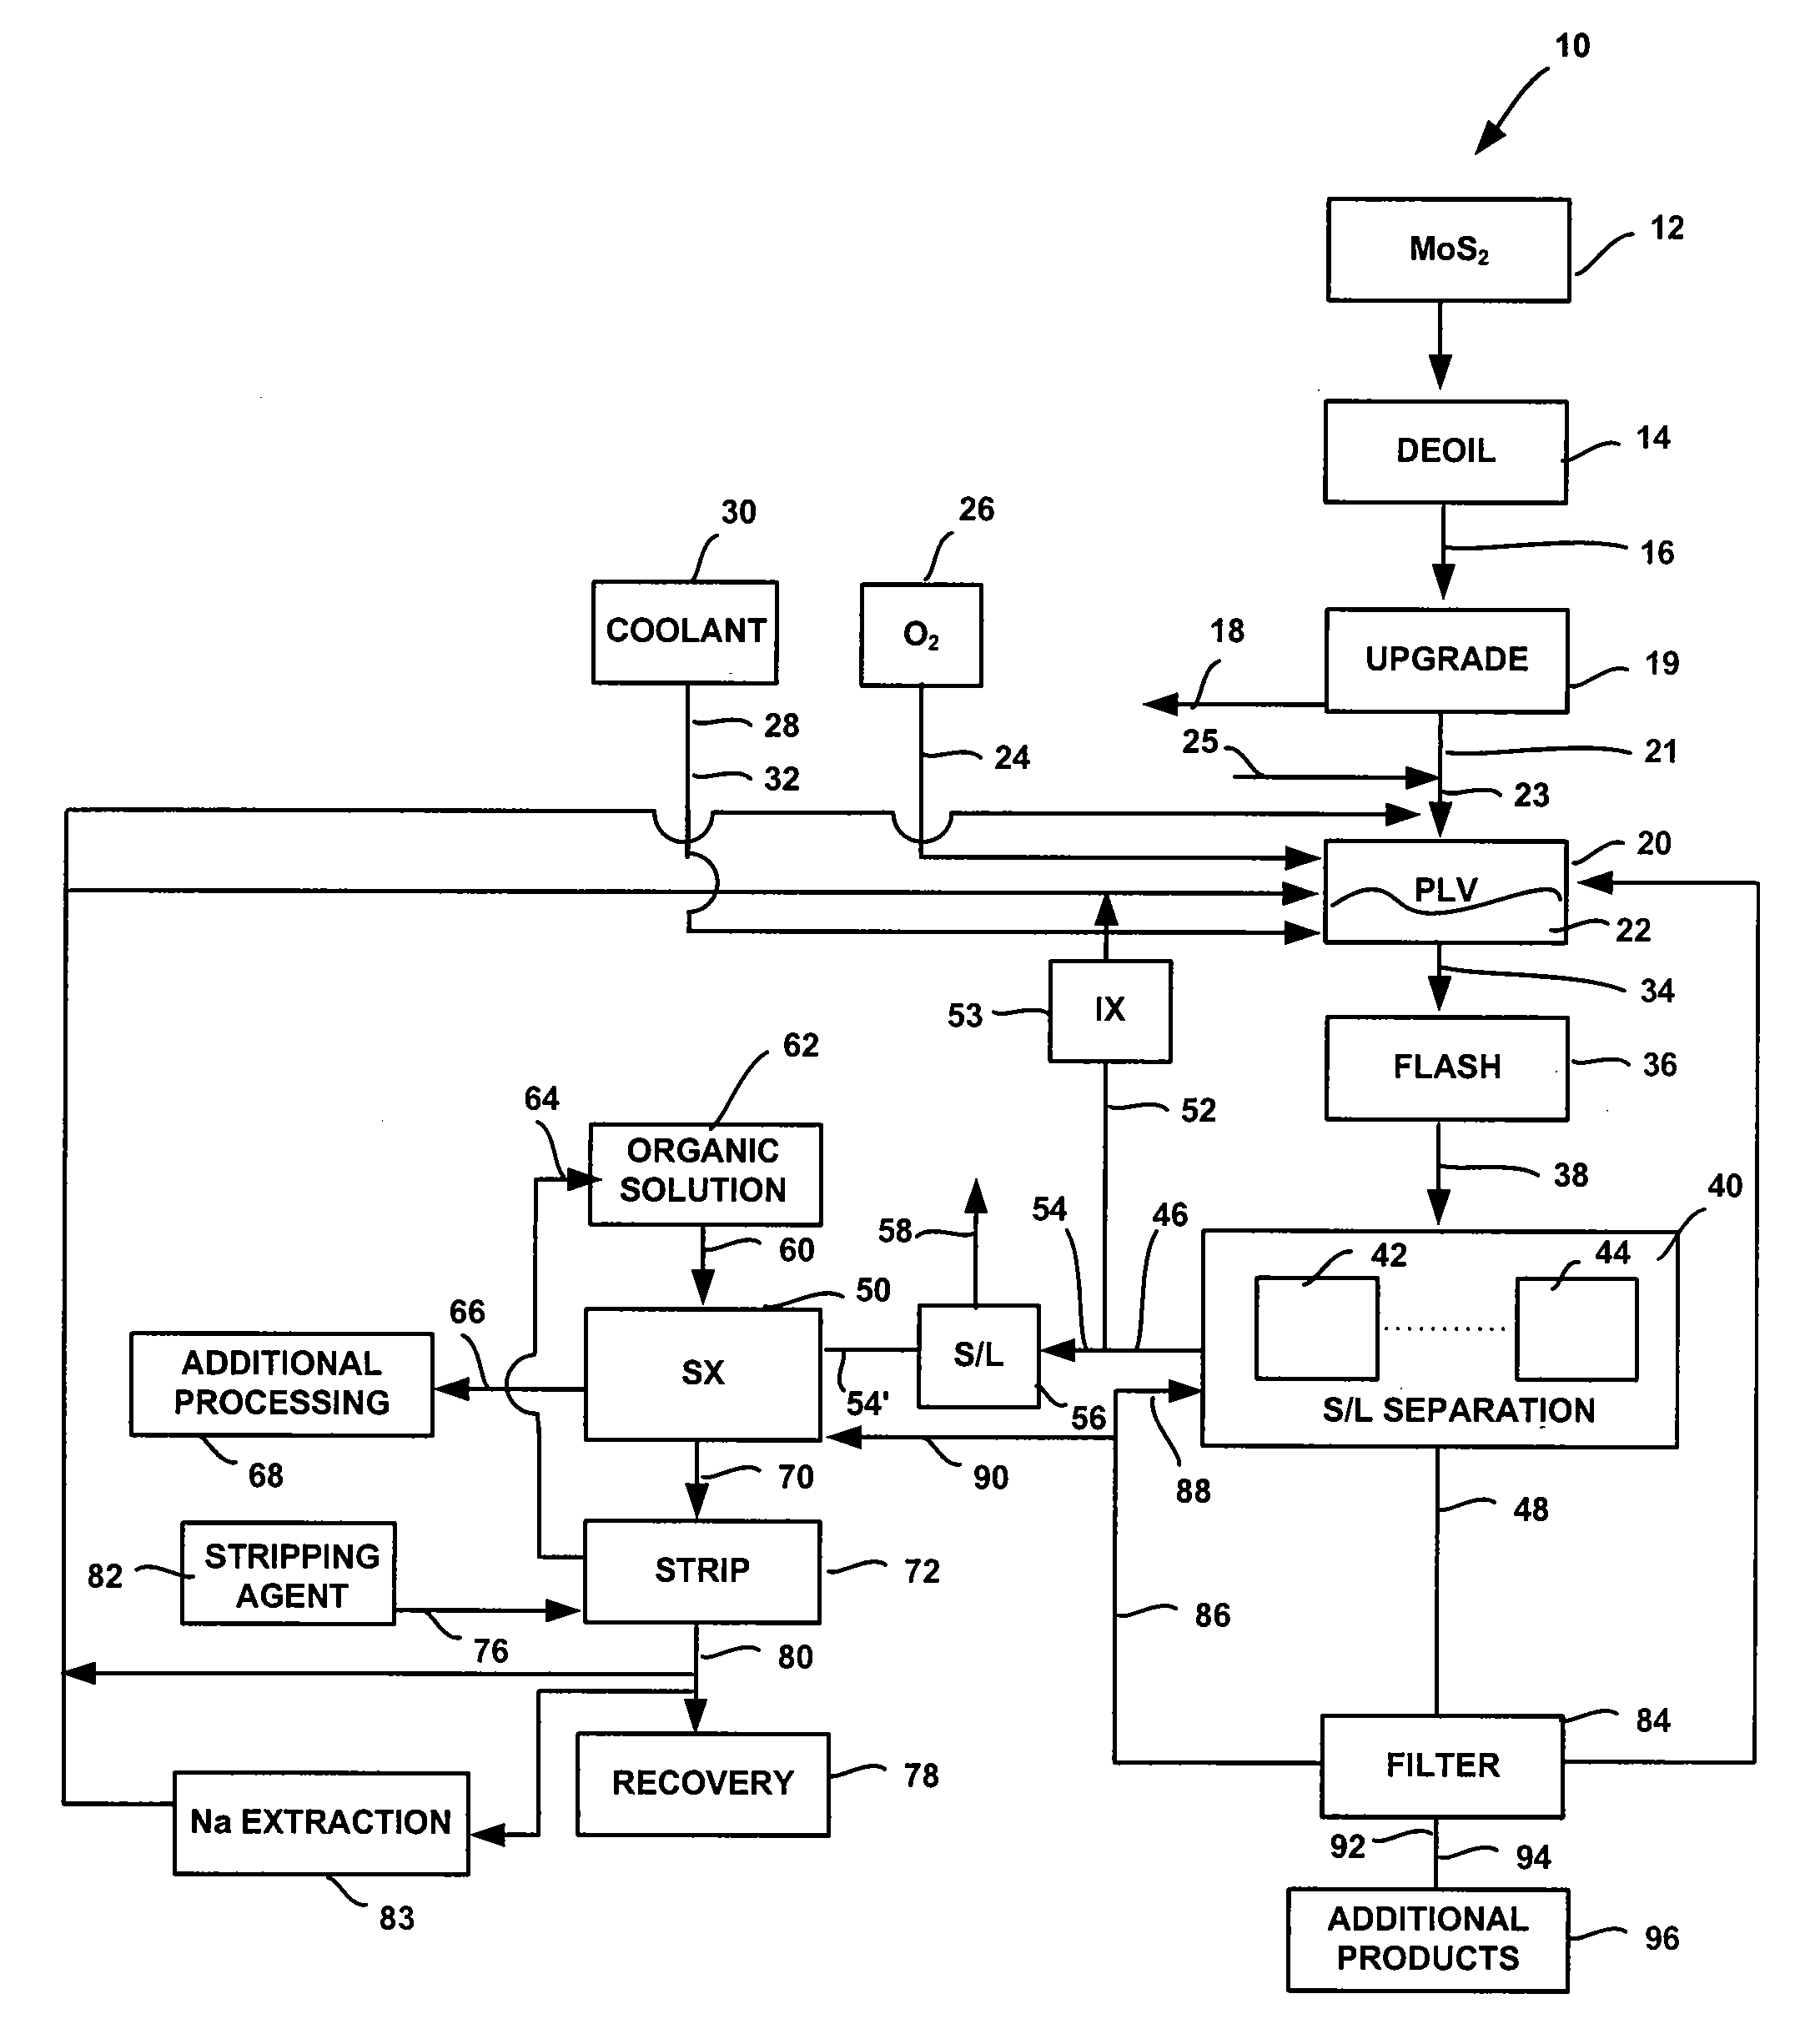 System and method for conversion of molybdenite to one or more molybdenum oxides